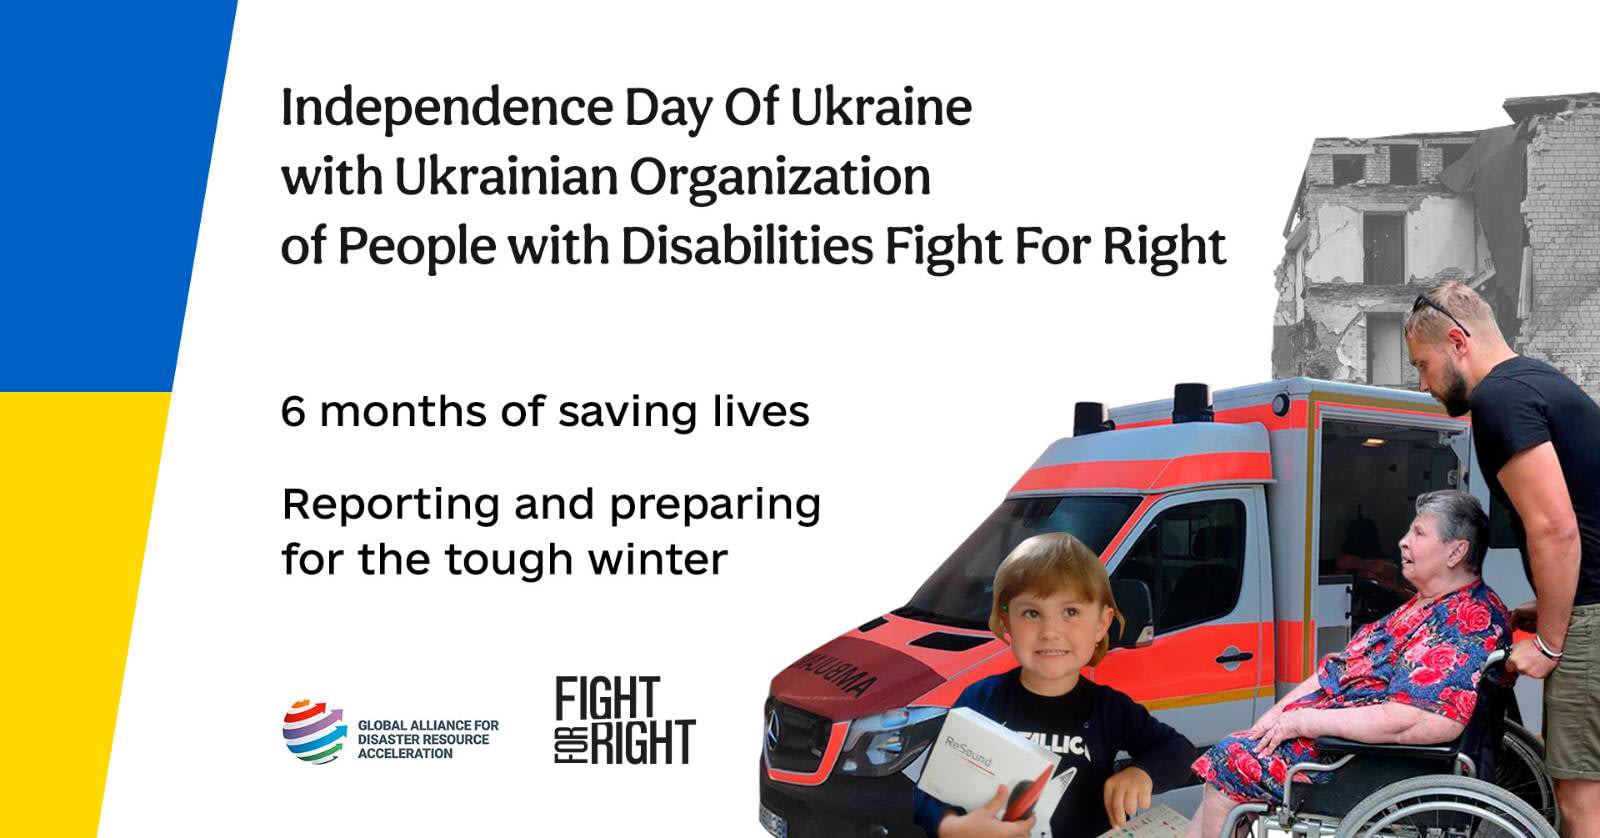 Graphic with text: Independence Day of Ukraine with Ukrainian Organization of People with Disabilities Fight For Right. 6 months of saving lives, reporting and preparing for the tough winter. Images of people with disabilities evacuating.